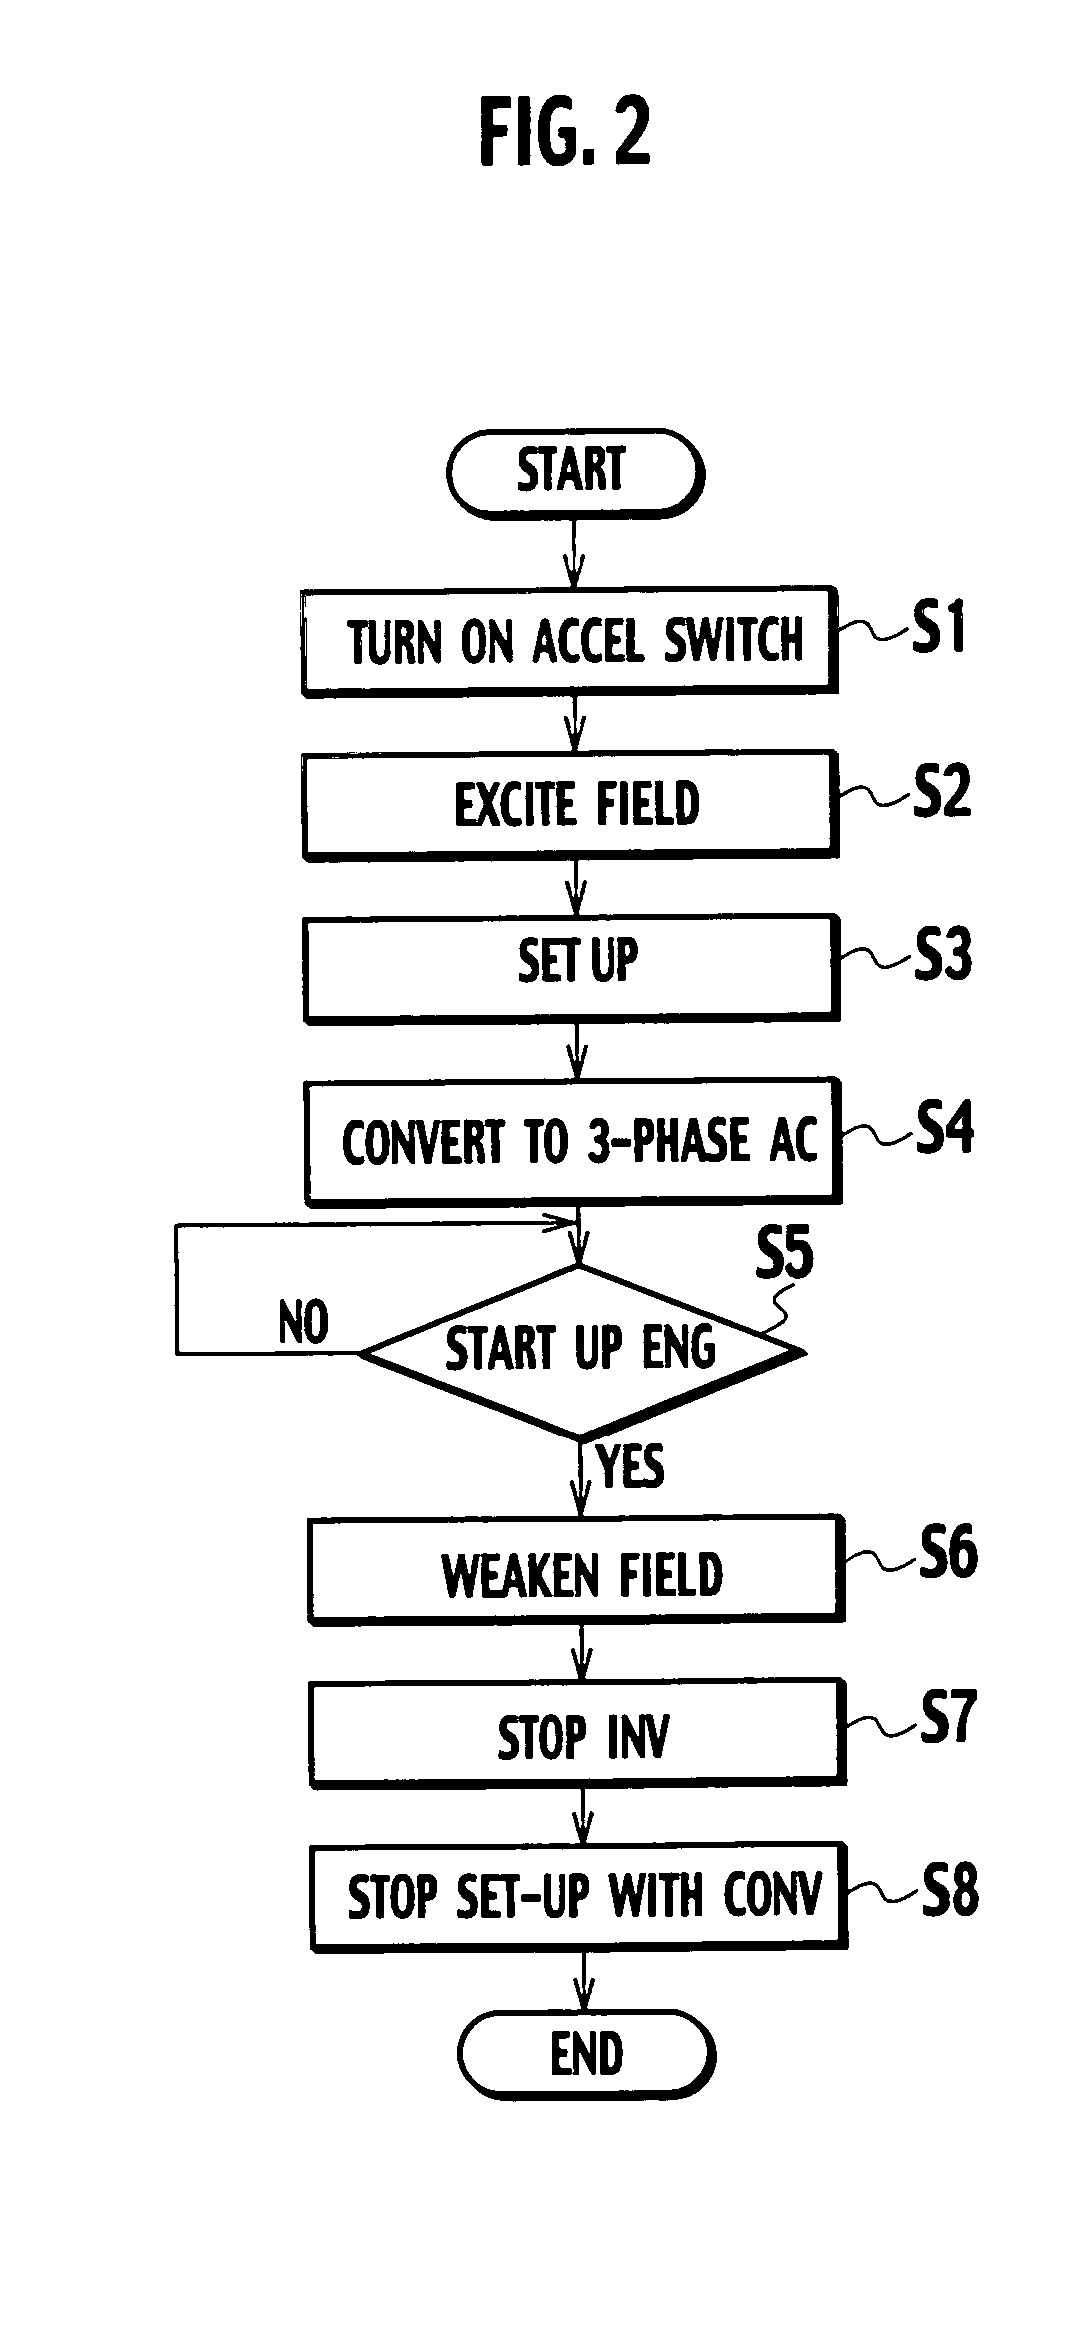 Control device for motor-driven 4WD vehicle and related control method